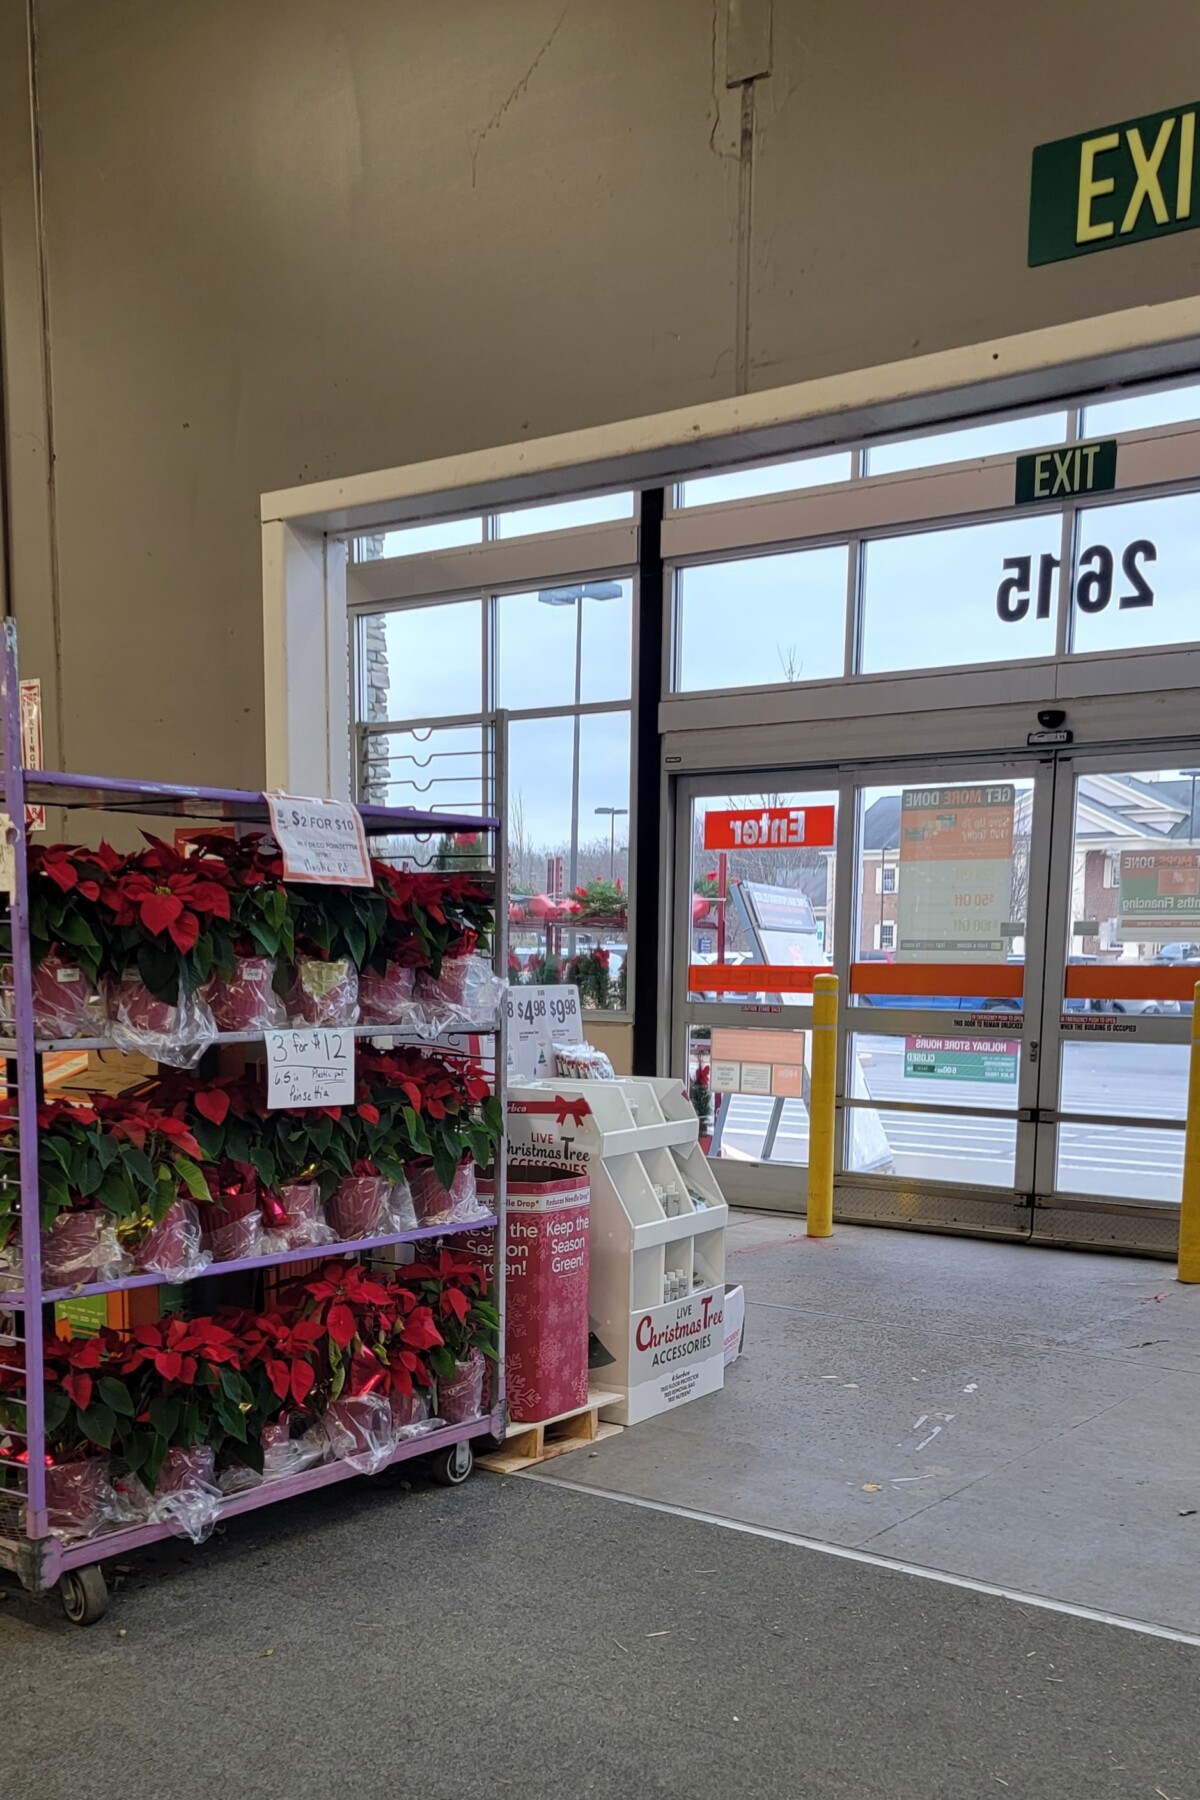 A display stand of poinsettias right next to the doors of a store.